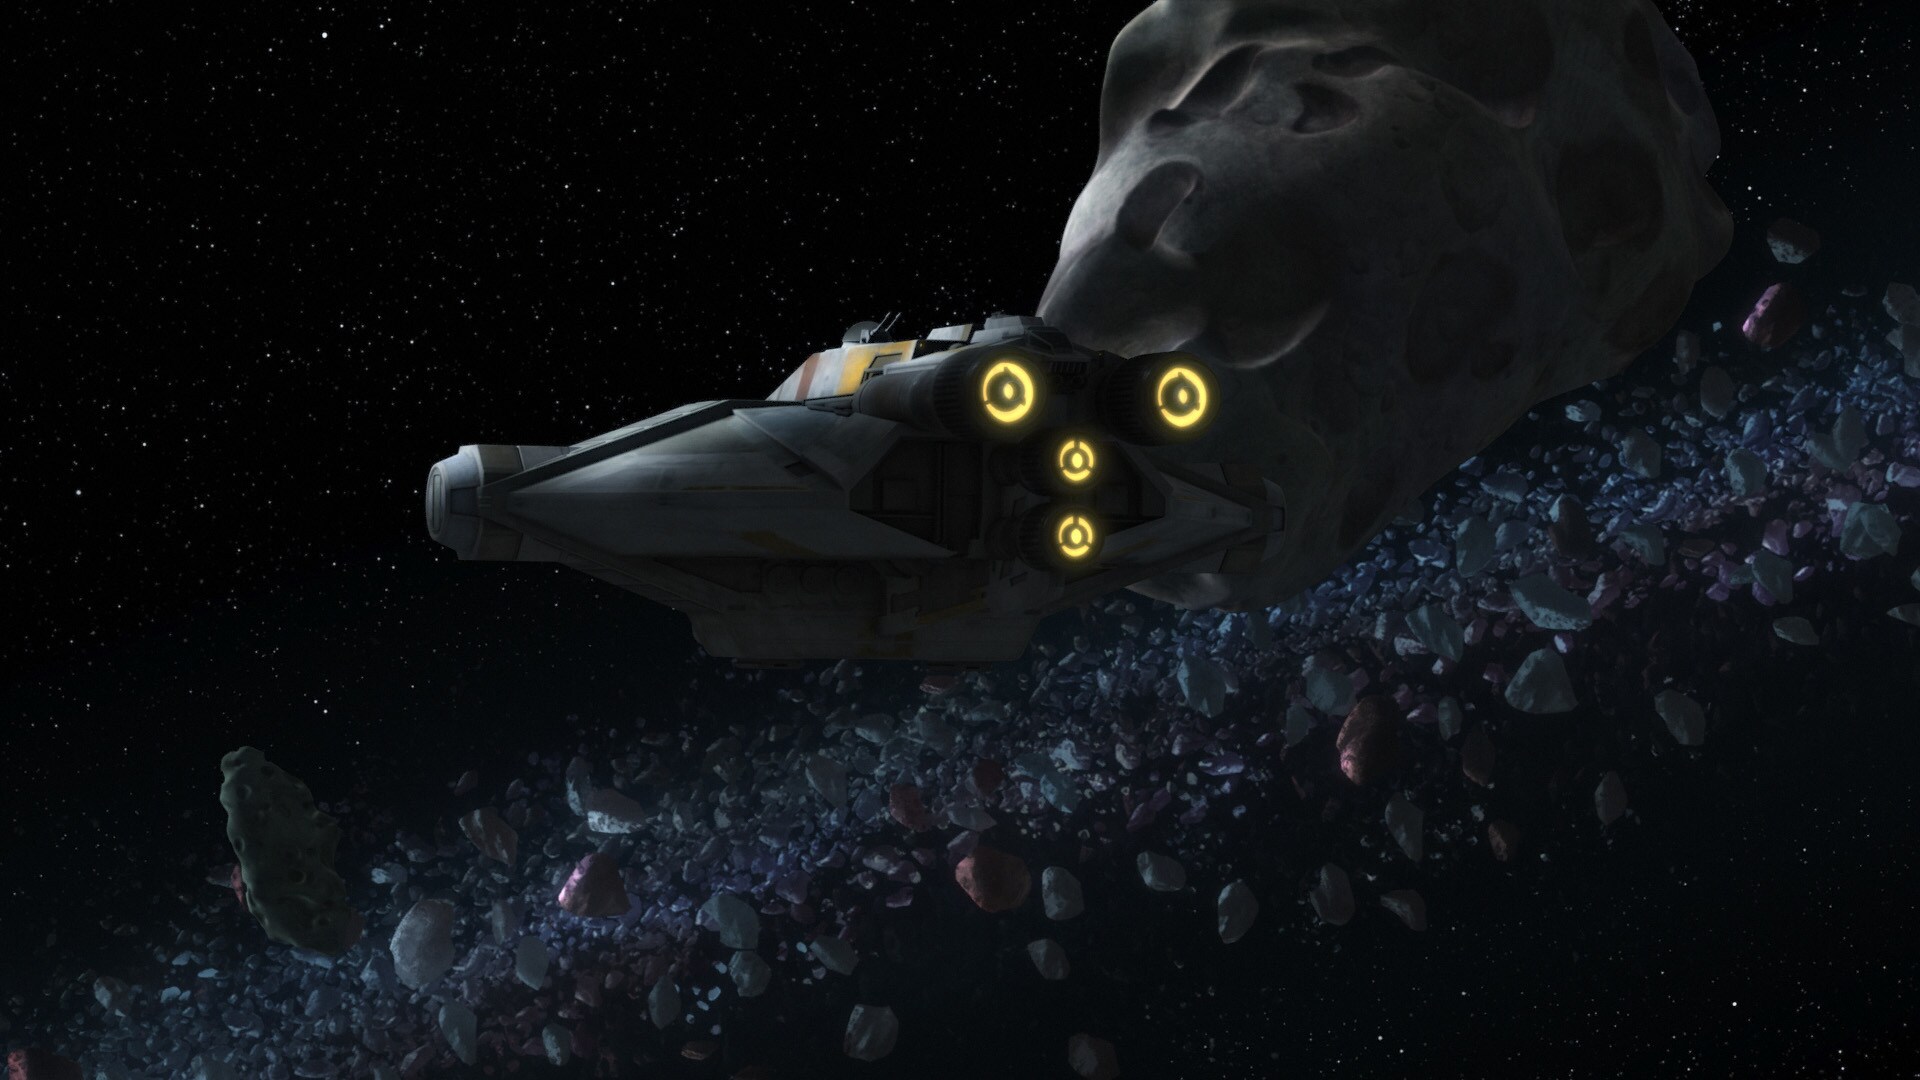 The Ghost crew is on a mission to locate fuel for the rebellion, and intel has led the team to an...